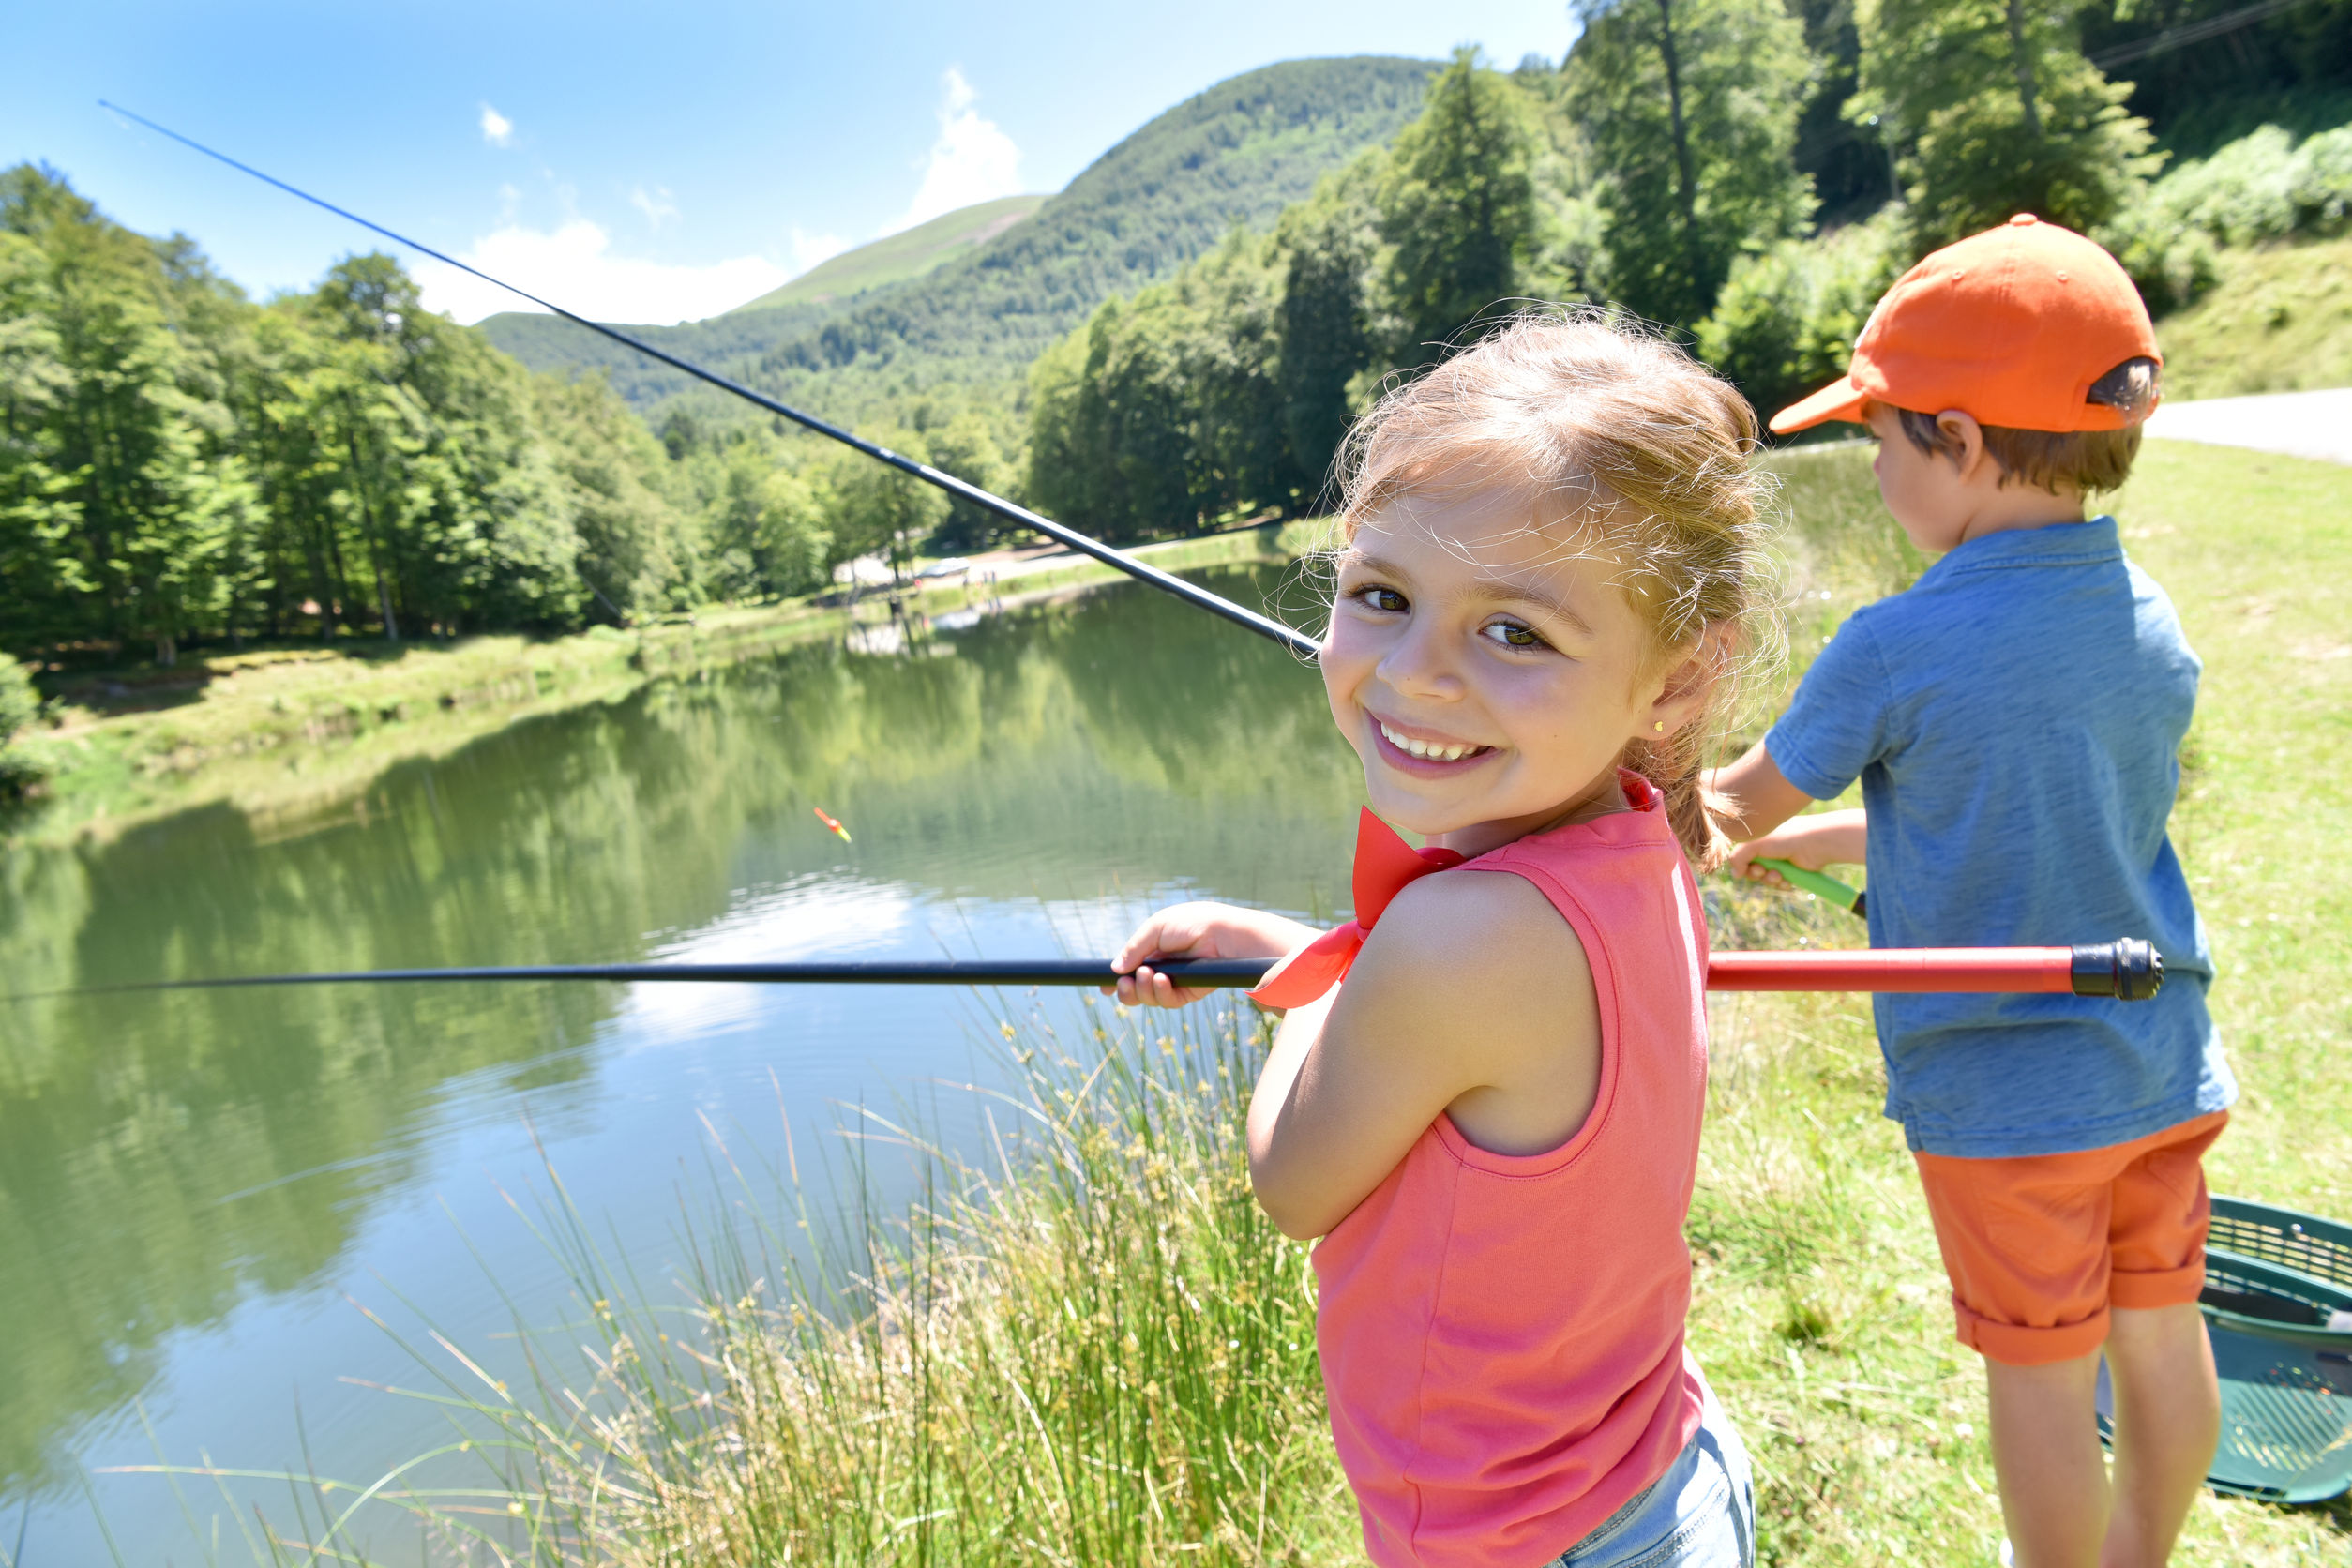 Kids fishing tournament benefits county parks